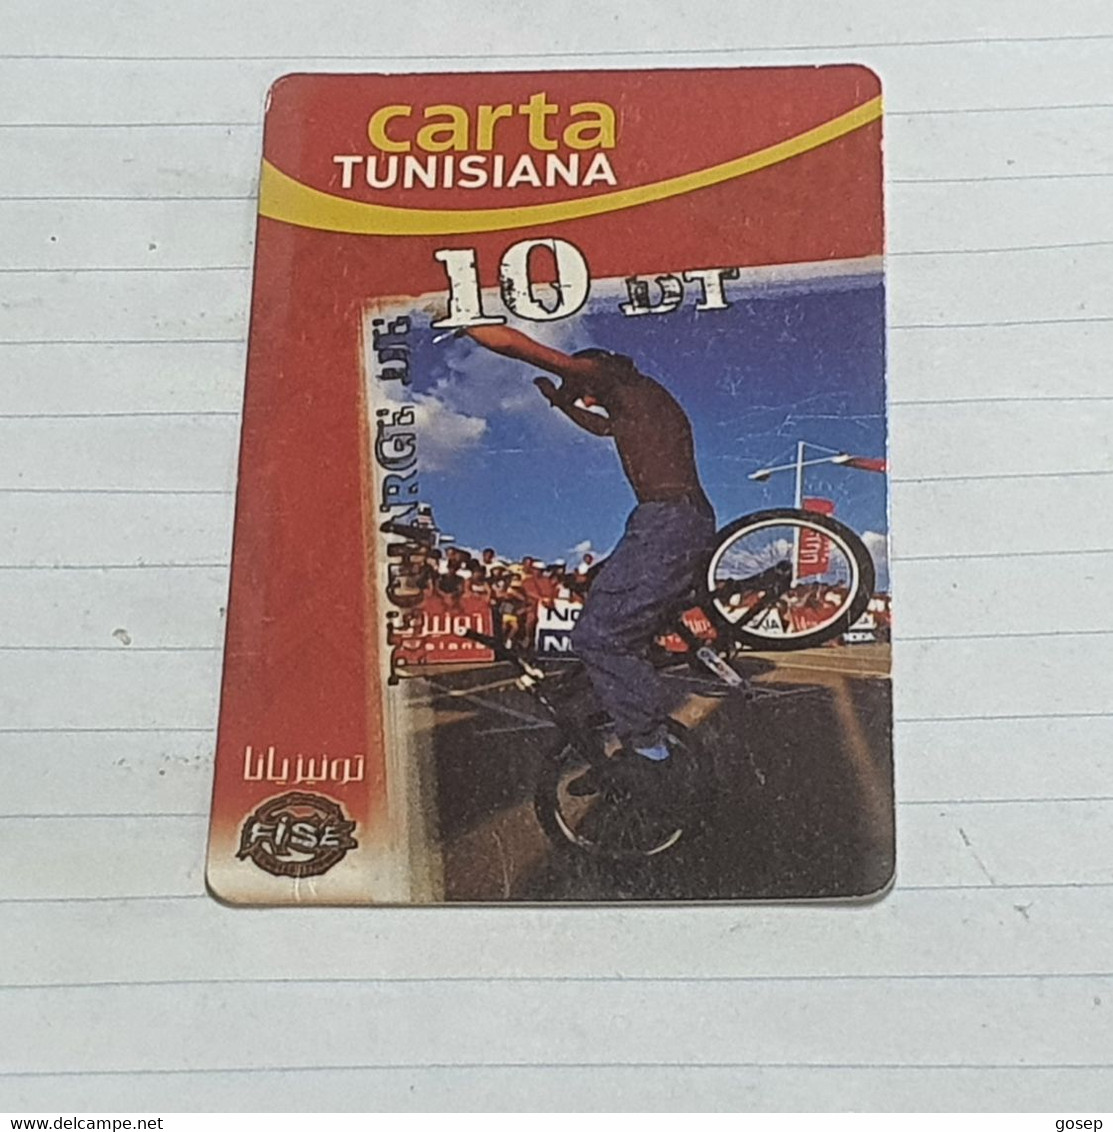 TUNISIA-(TUN-REF-TUN-20)-sport Extrem7-(116)-(8919-119-6551-751)(look From Out Side Card Barcode)-used Card - Tunisia